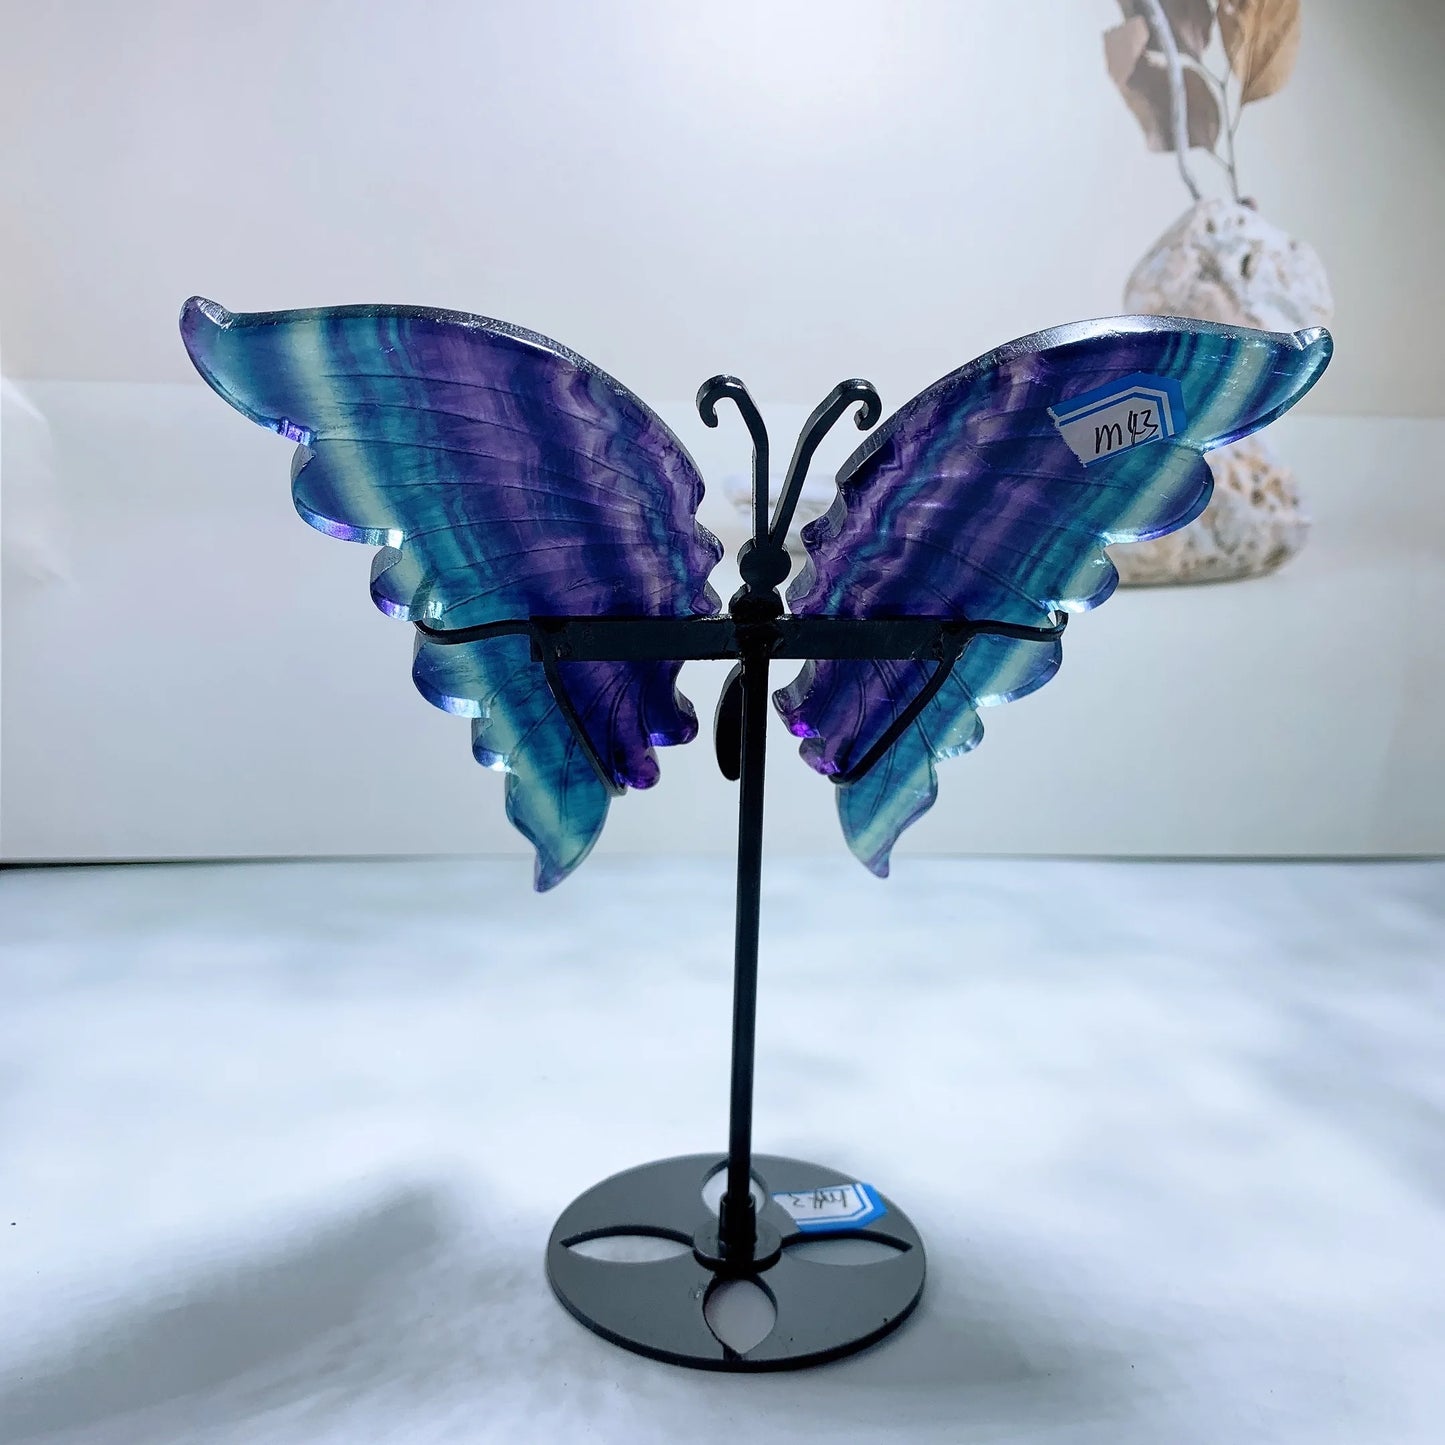 Fluorite butterfly wings，Crystal butterfly wings with stand,Wings carving,Wings figurine,Crystal gift,Home decoration,Reiki heal